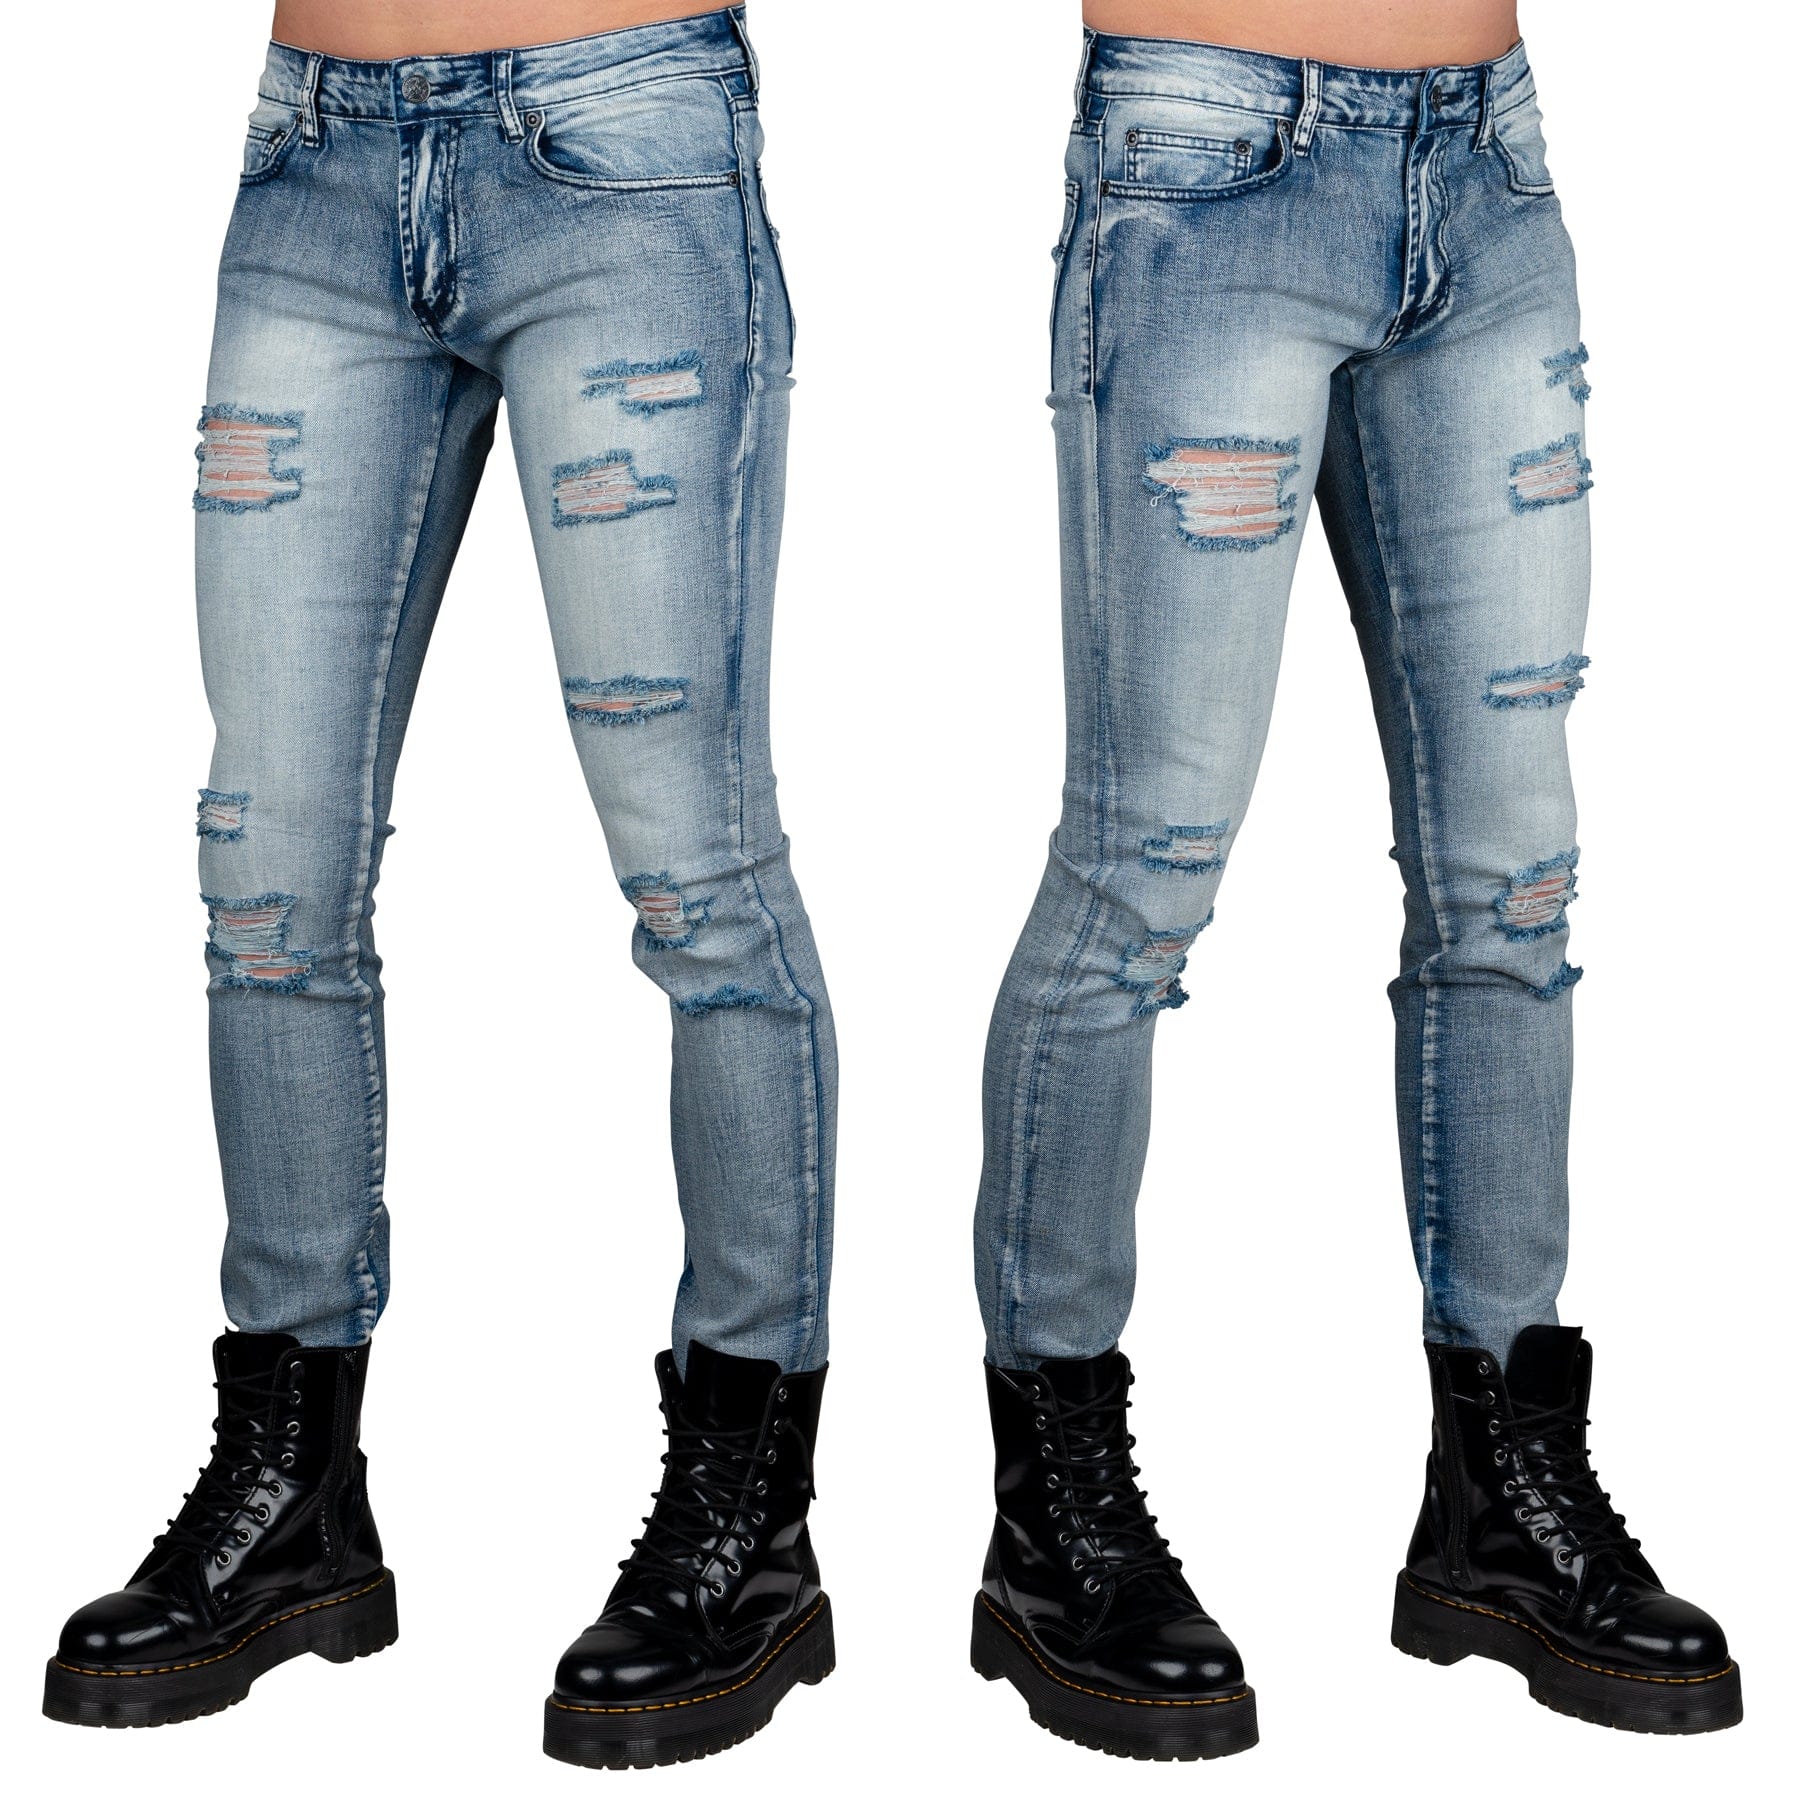 Wornstar Clothing Rampager Shredded Mens Jeans - Classic Blue